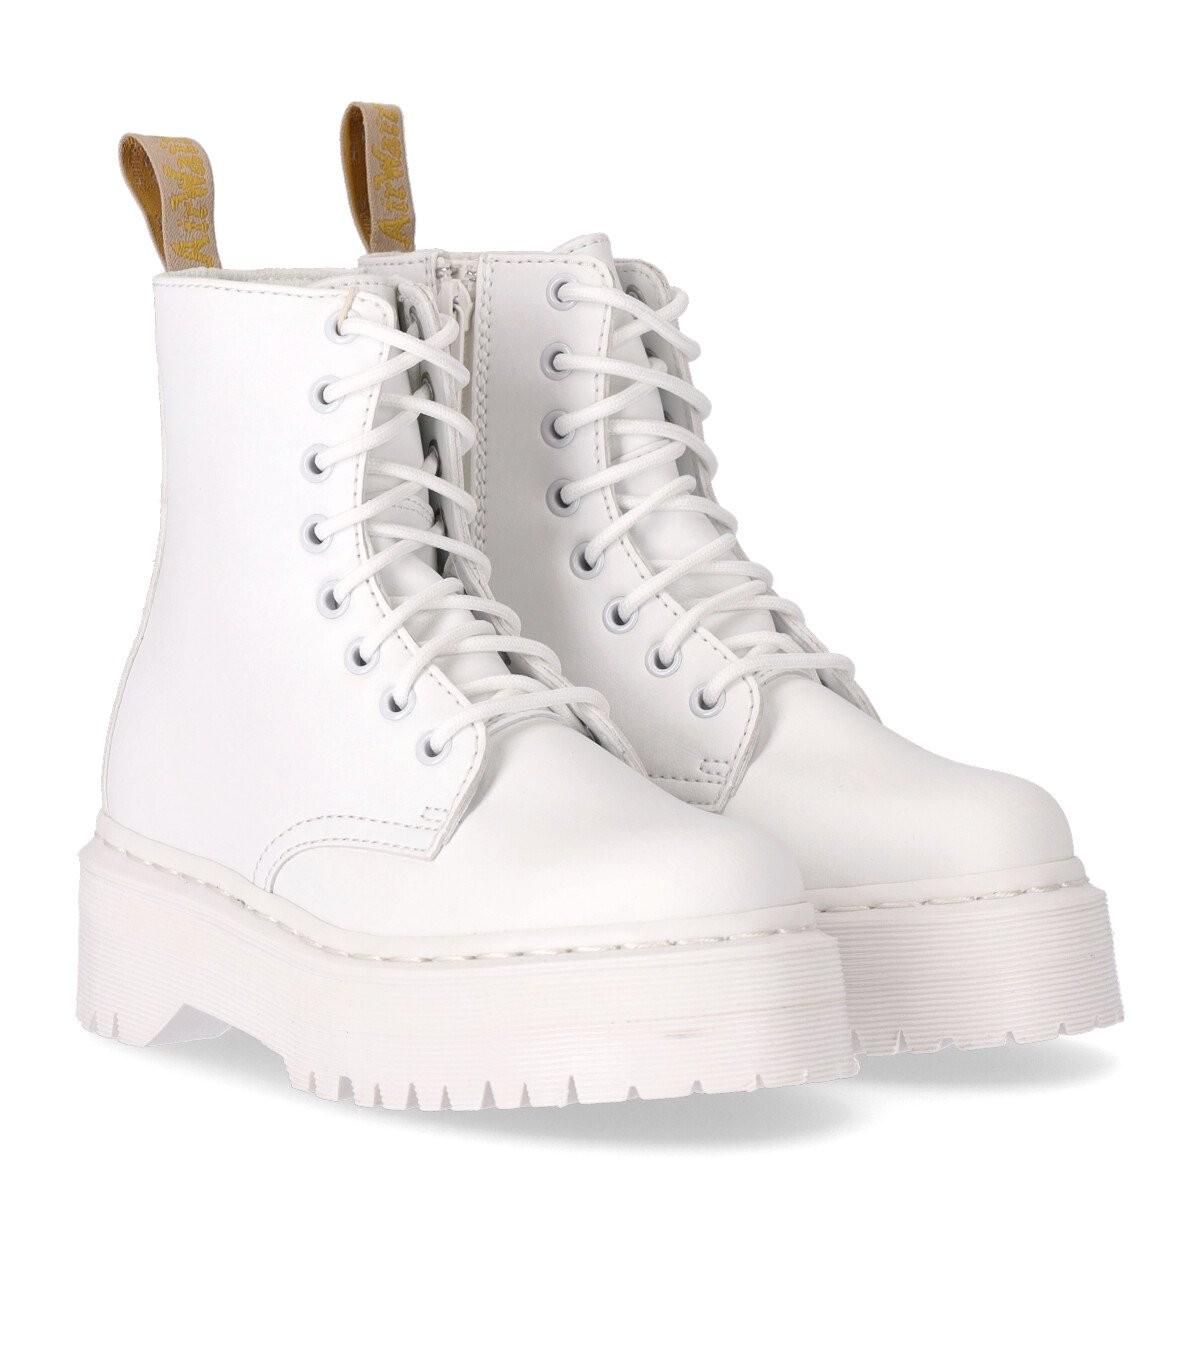 Save 7% Martens Synthetic Jadon Vegan Ii Mono White Combat Boot in Natural Martens Boots Dr Womens Boots Dr 